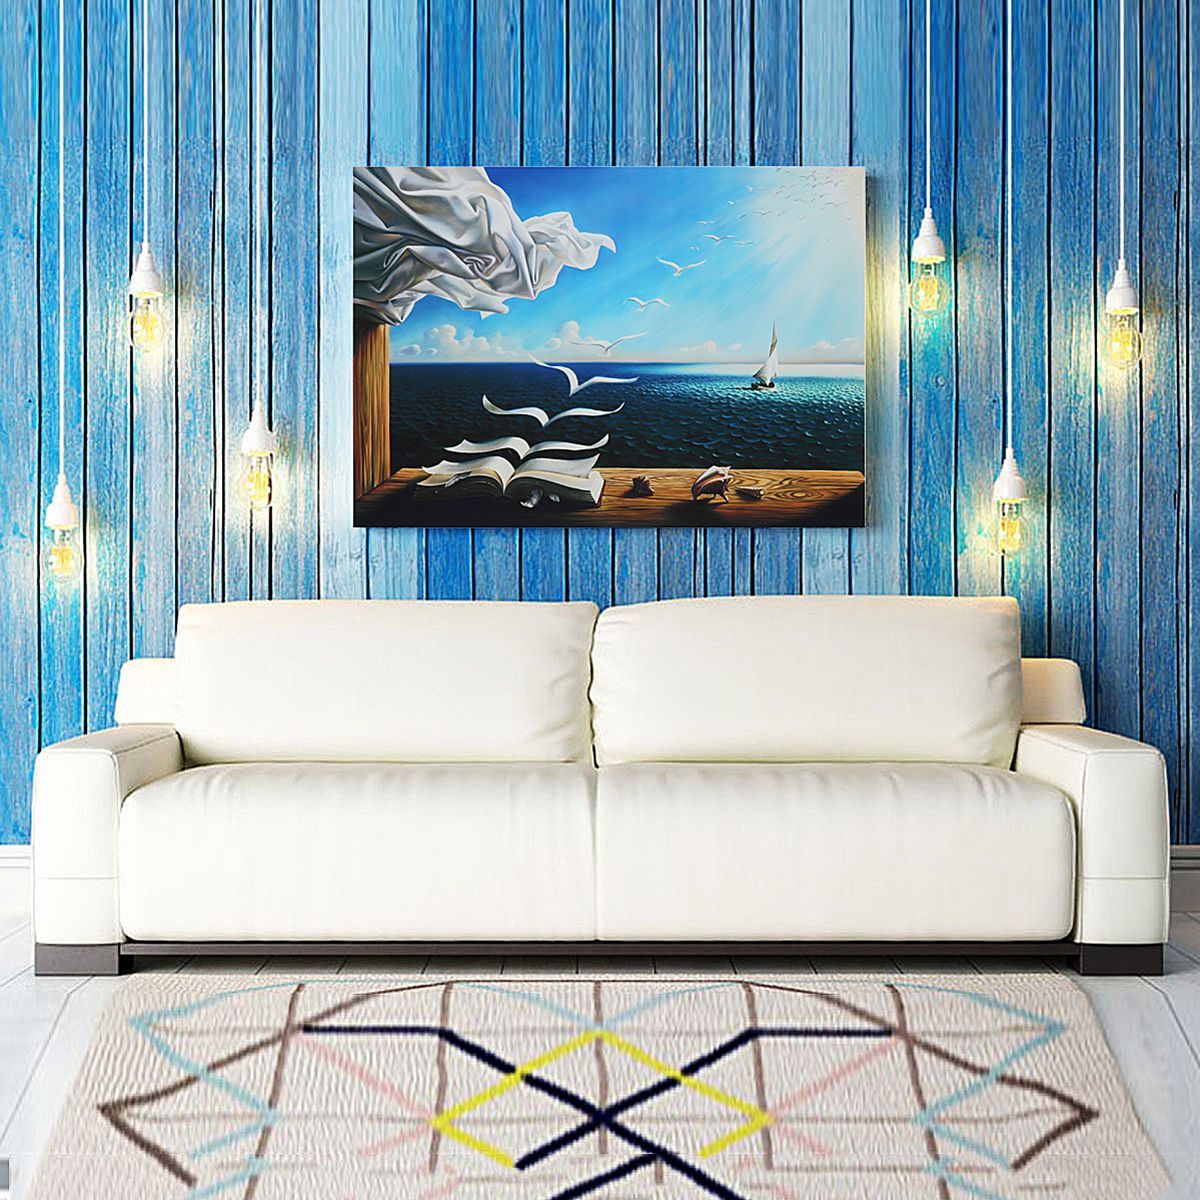 Modern-Sea-Canvas-Print-Painting-Poster-Wall-Mount-Art-Unframed-Picture-Home-Decorations-1465368